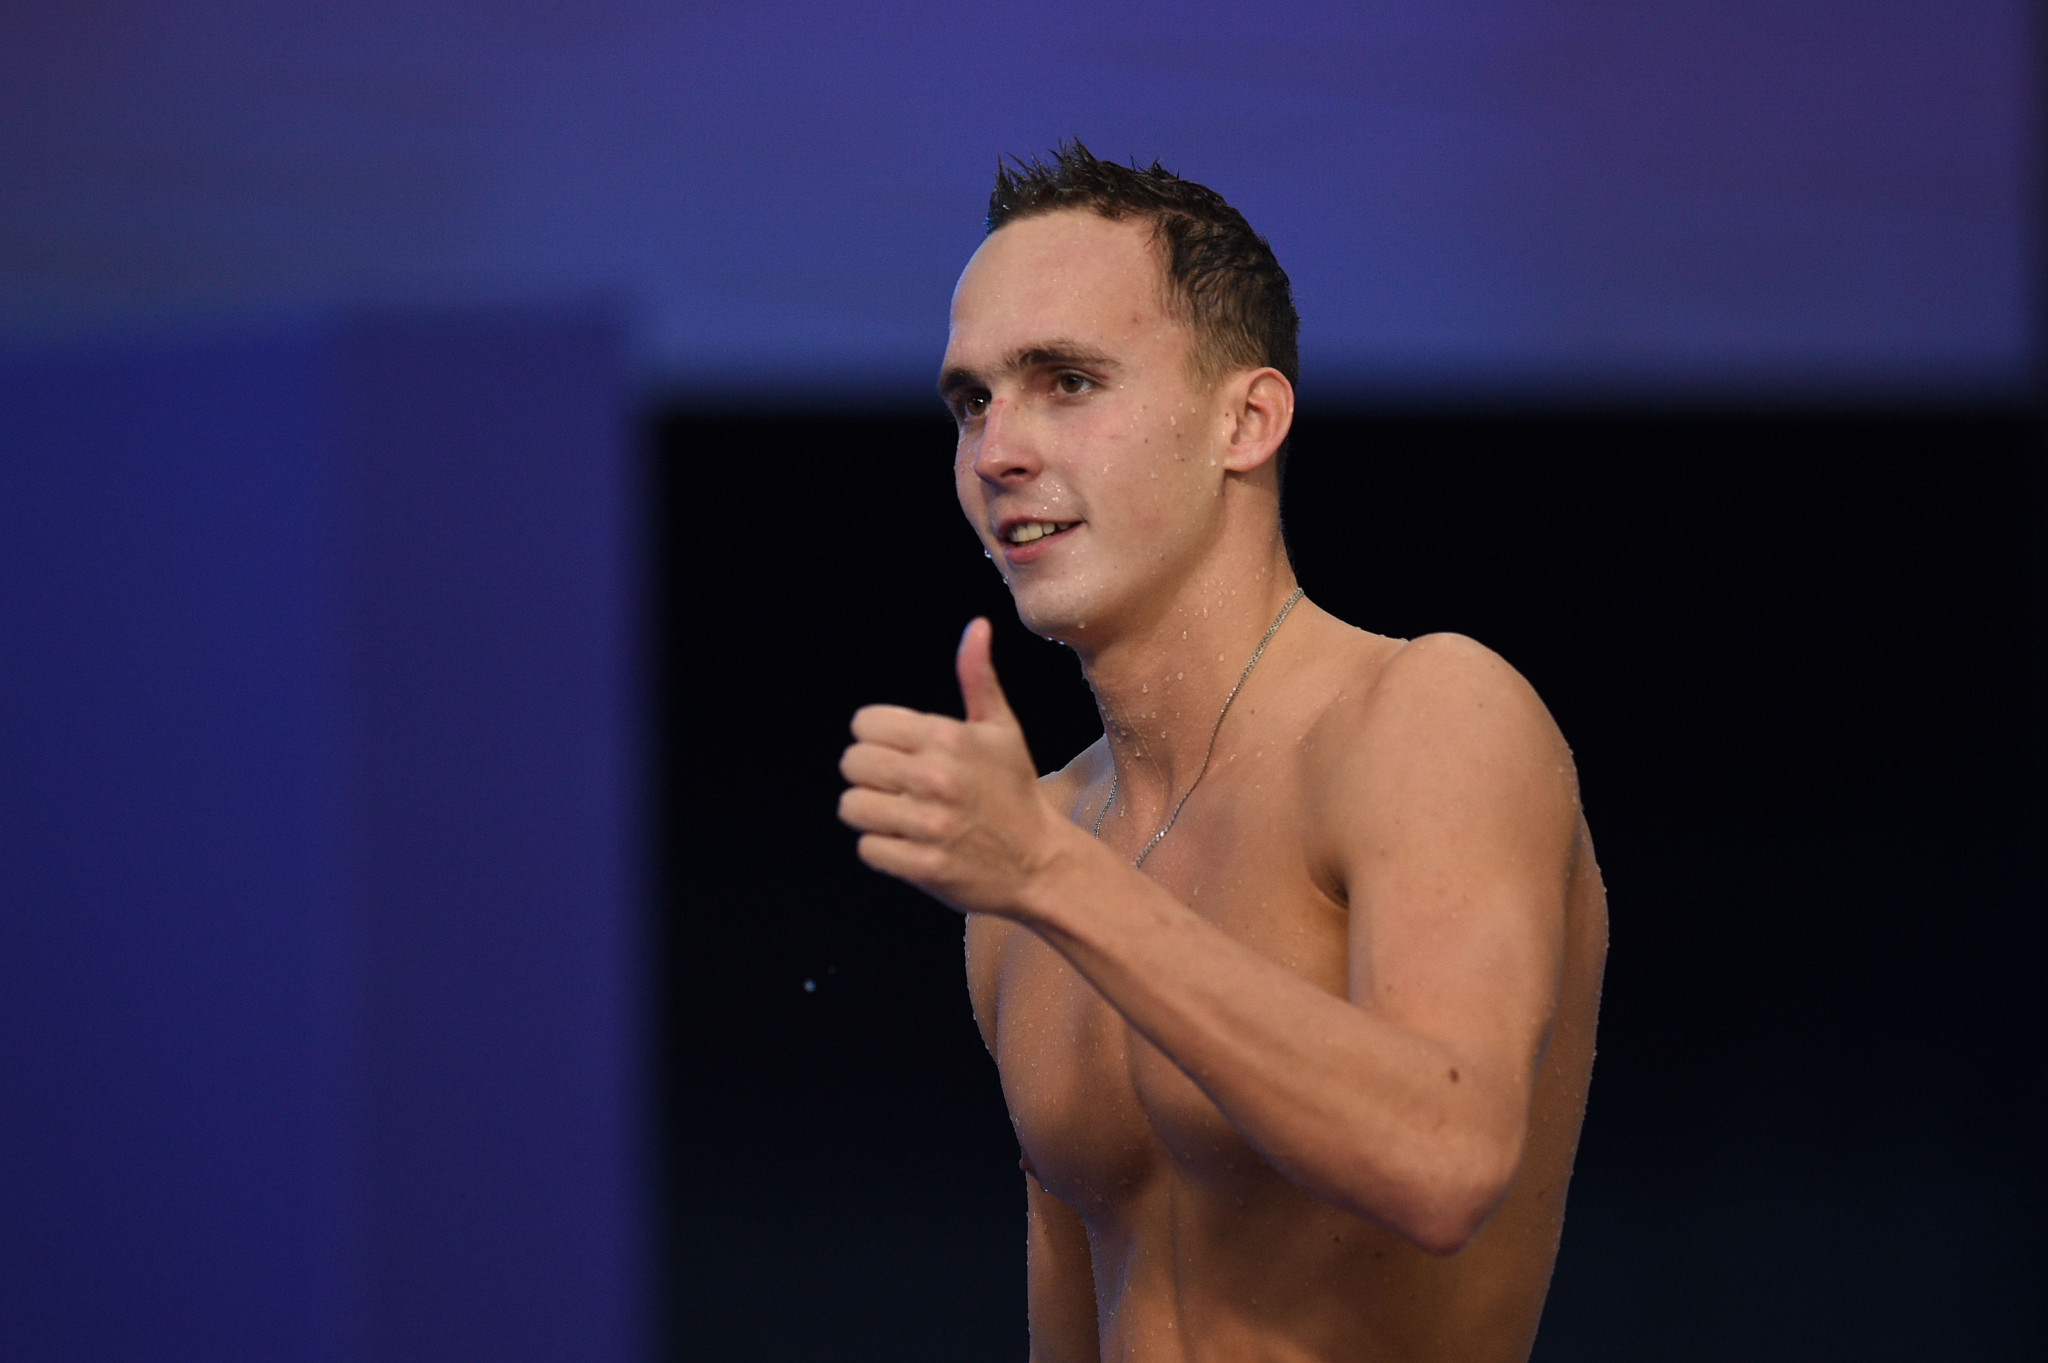 Anton Chupkov set a new World Cup record to win the men's 200m breaststroke ©Getty Images